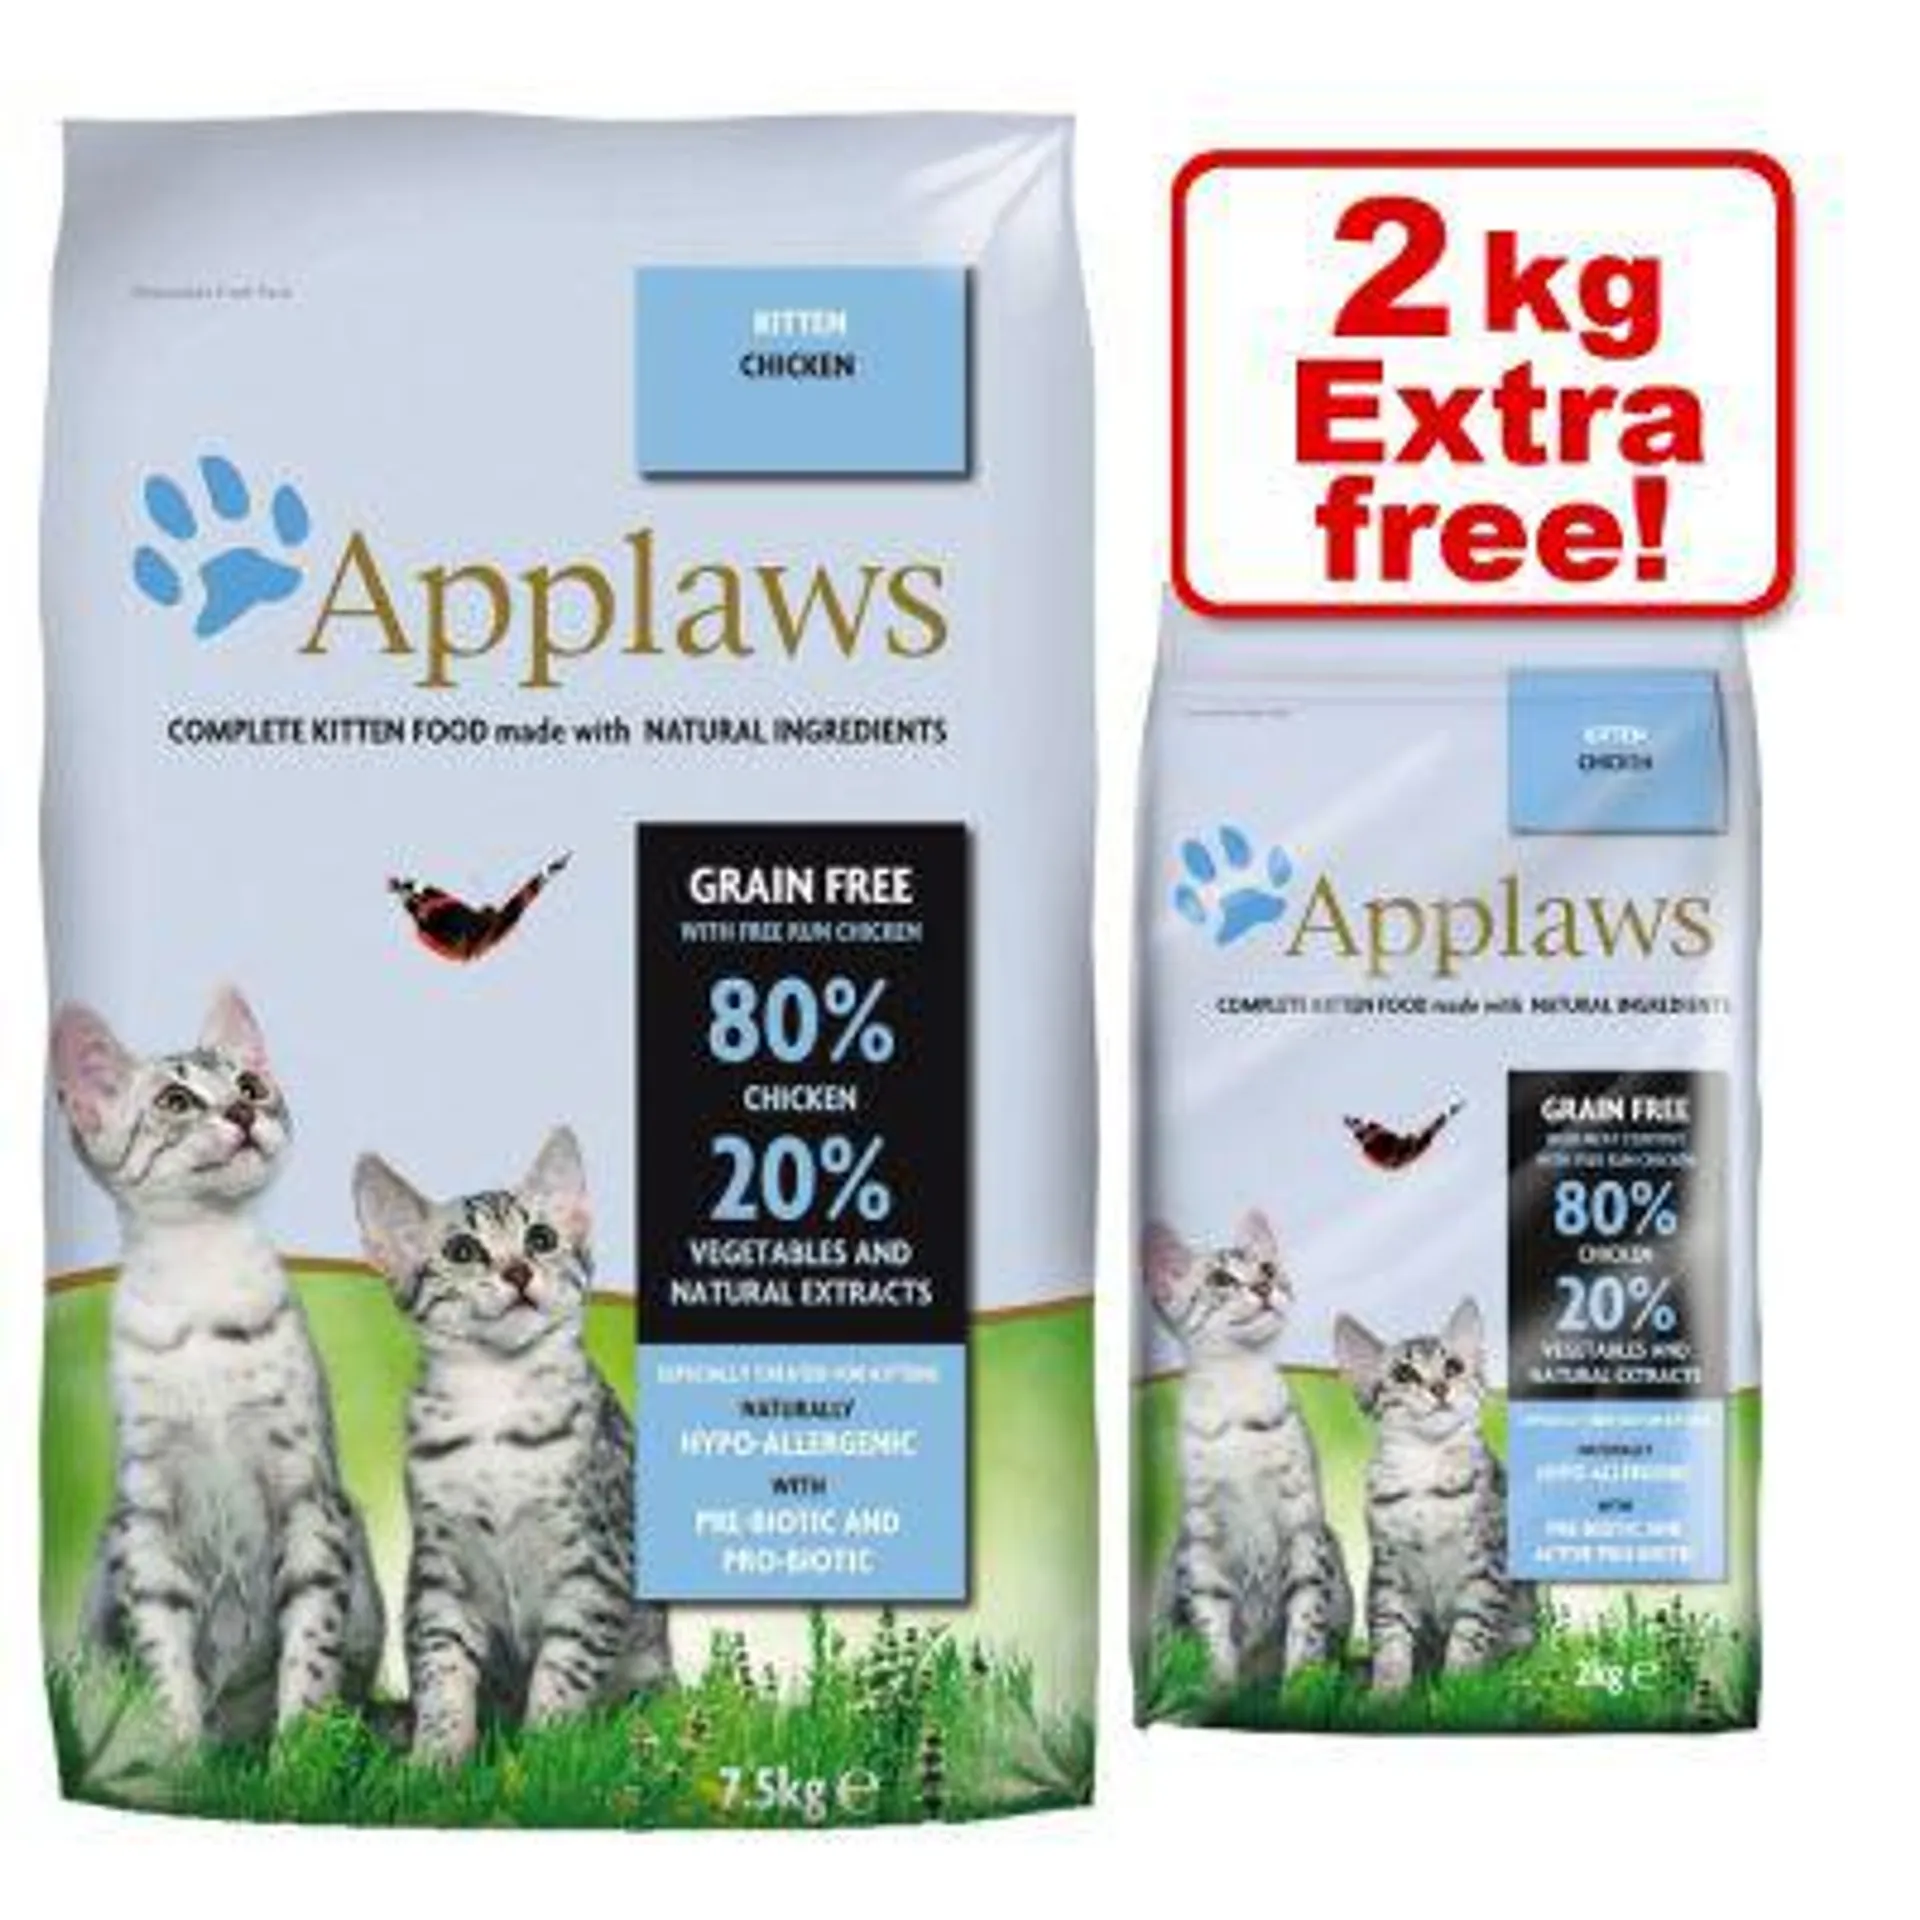 7.5kg Applaws Dry Cat Food + 2kg Extra Free!*